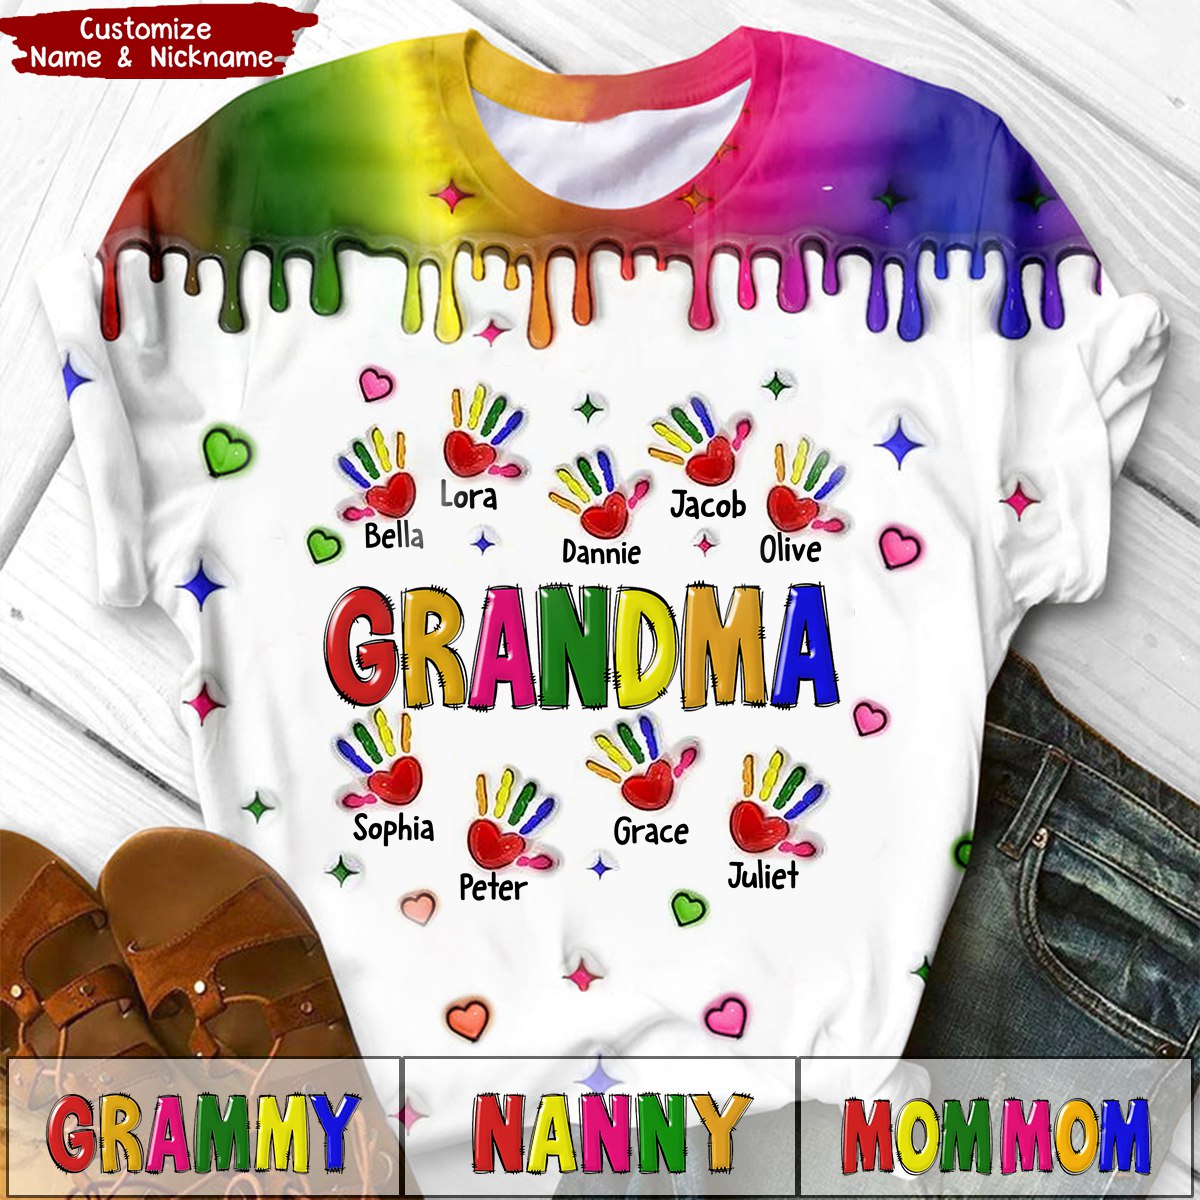 Colorful Grandma Mom Handprint Grandkids 3D Inflated Effect Personalized T-shirt